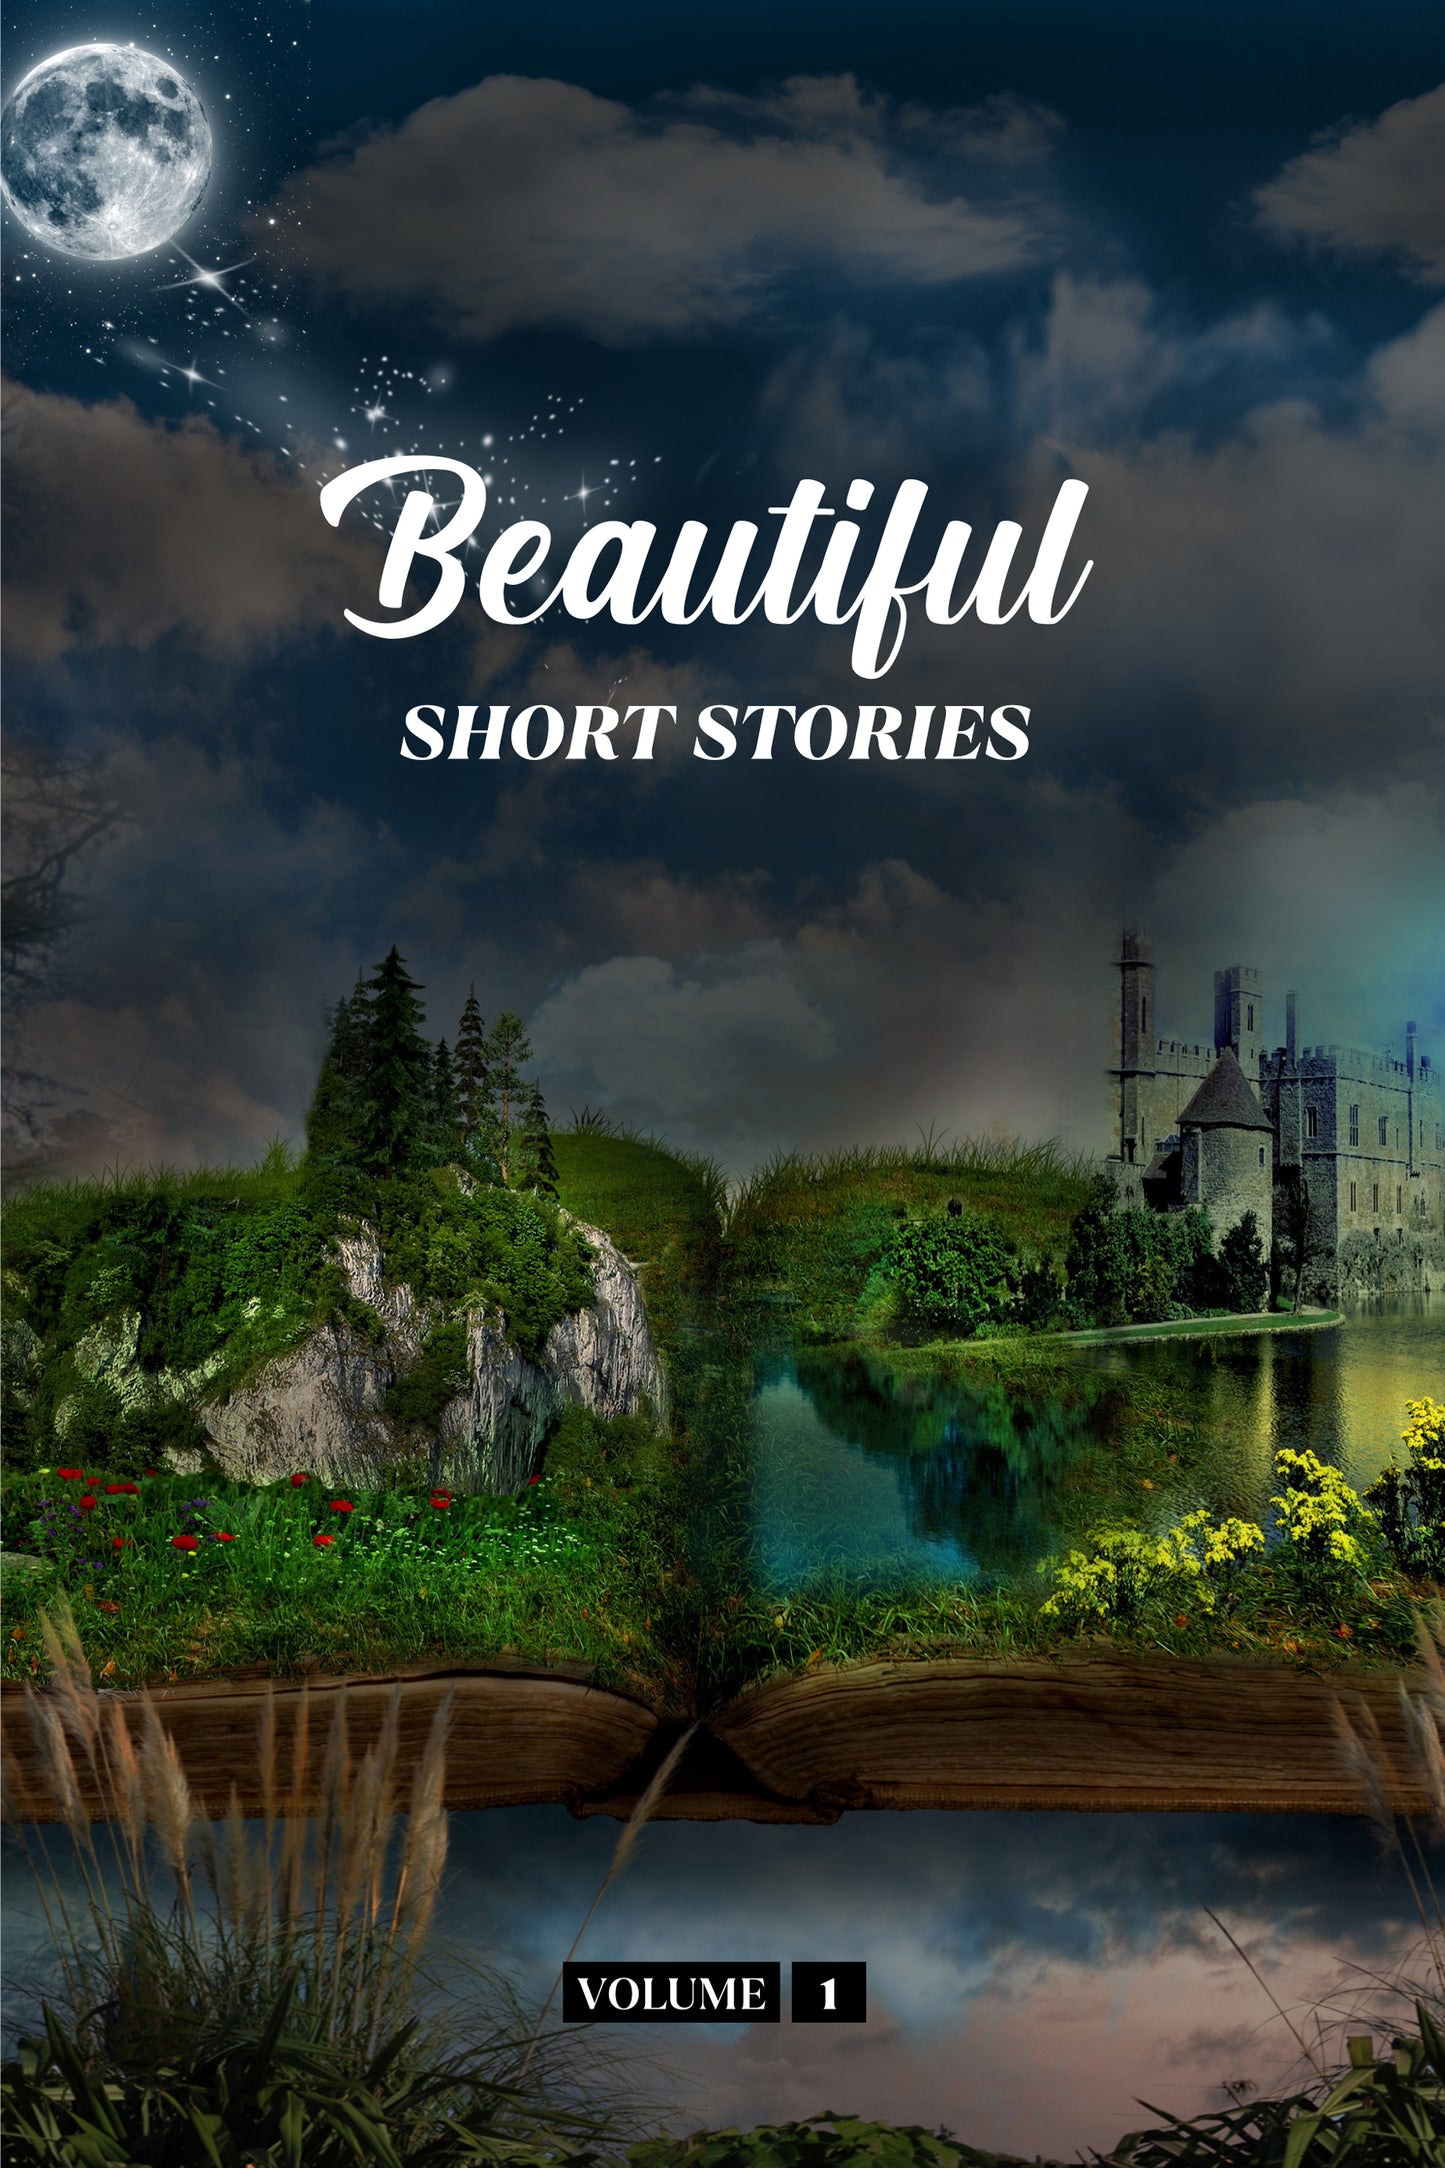 Beautiful Short Stories Volume 1 (Physical Book)